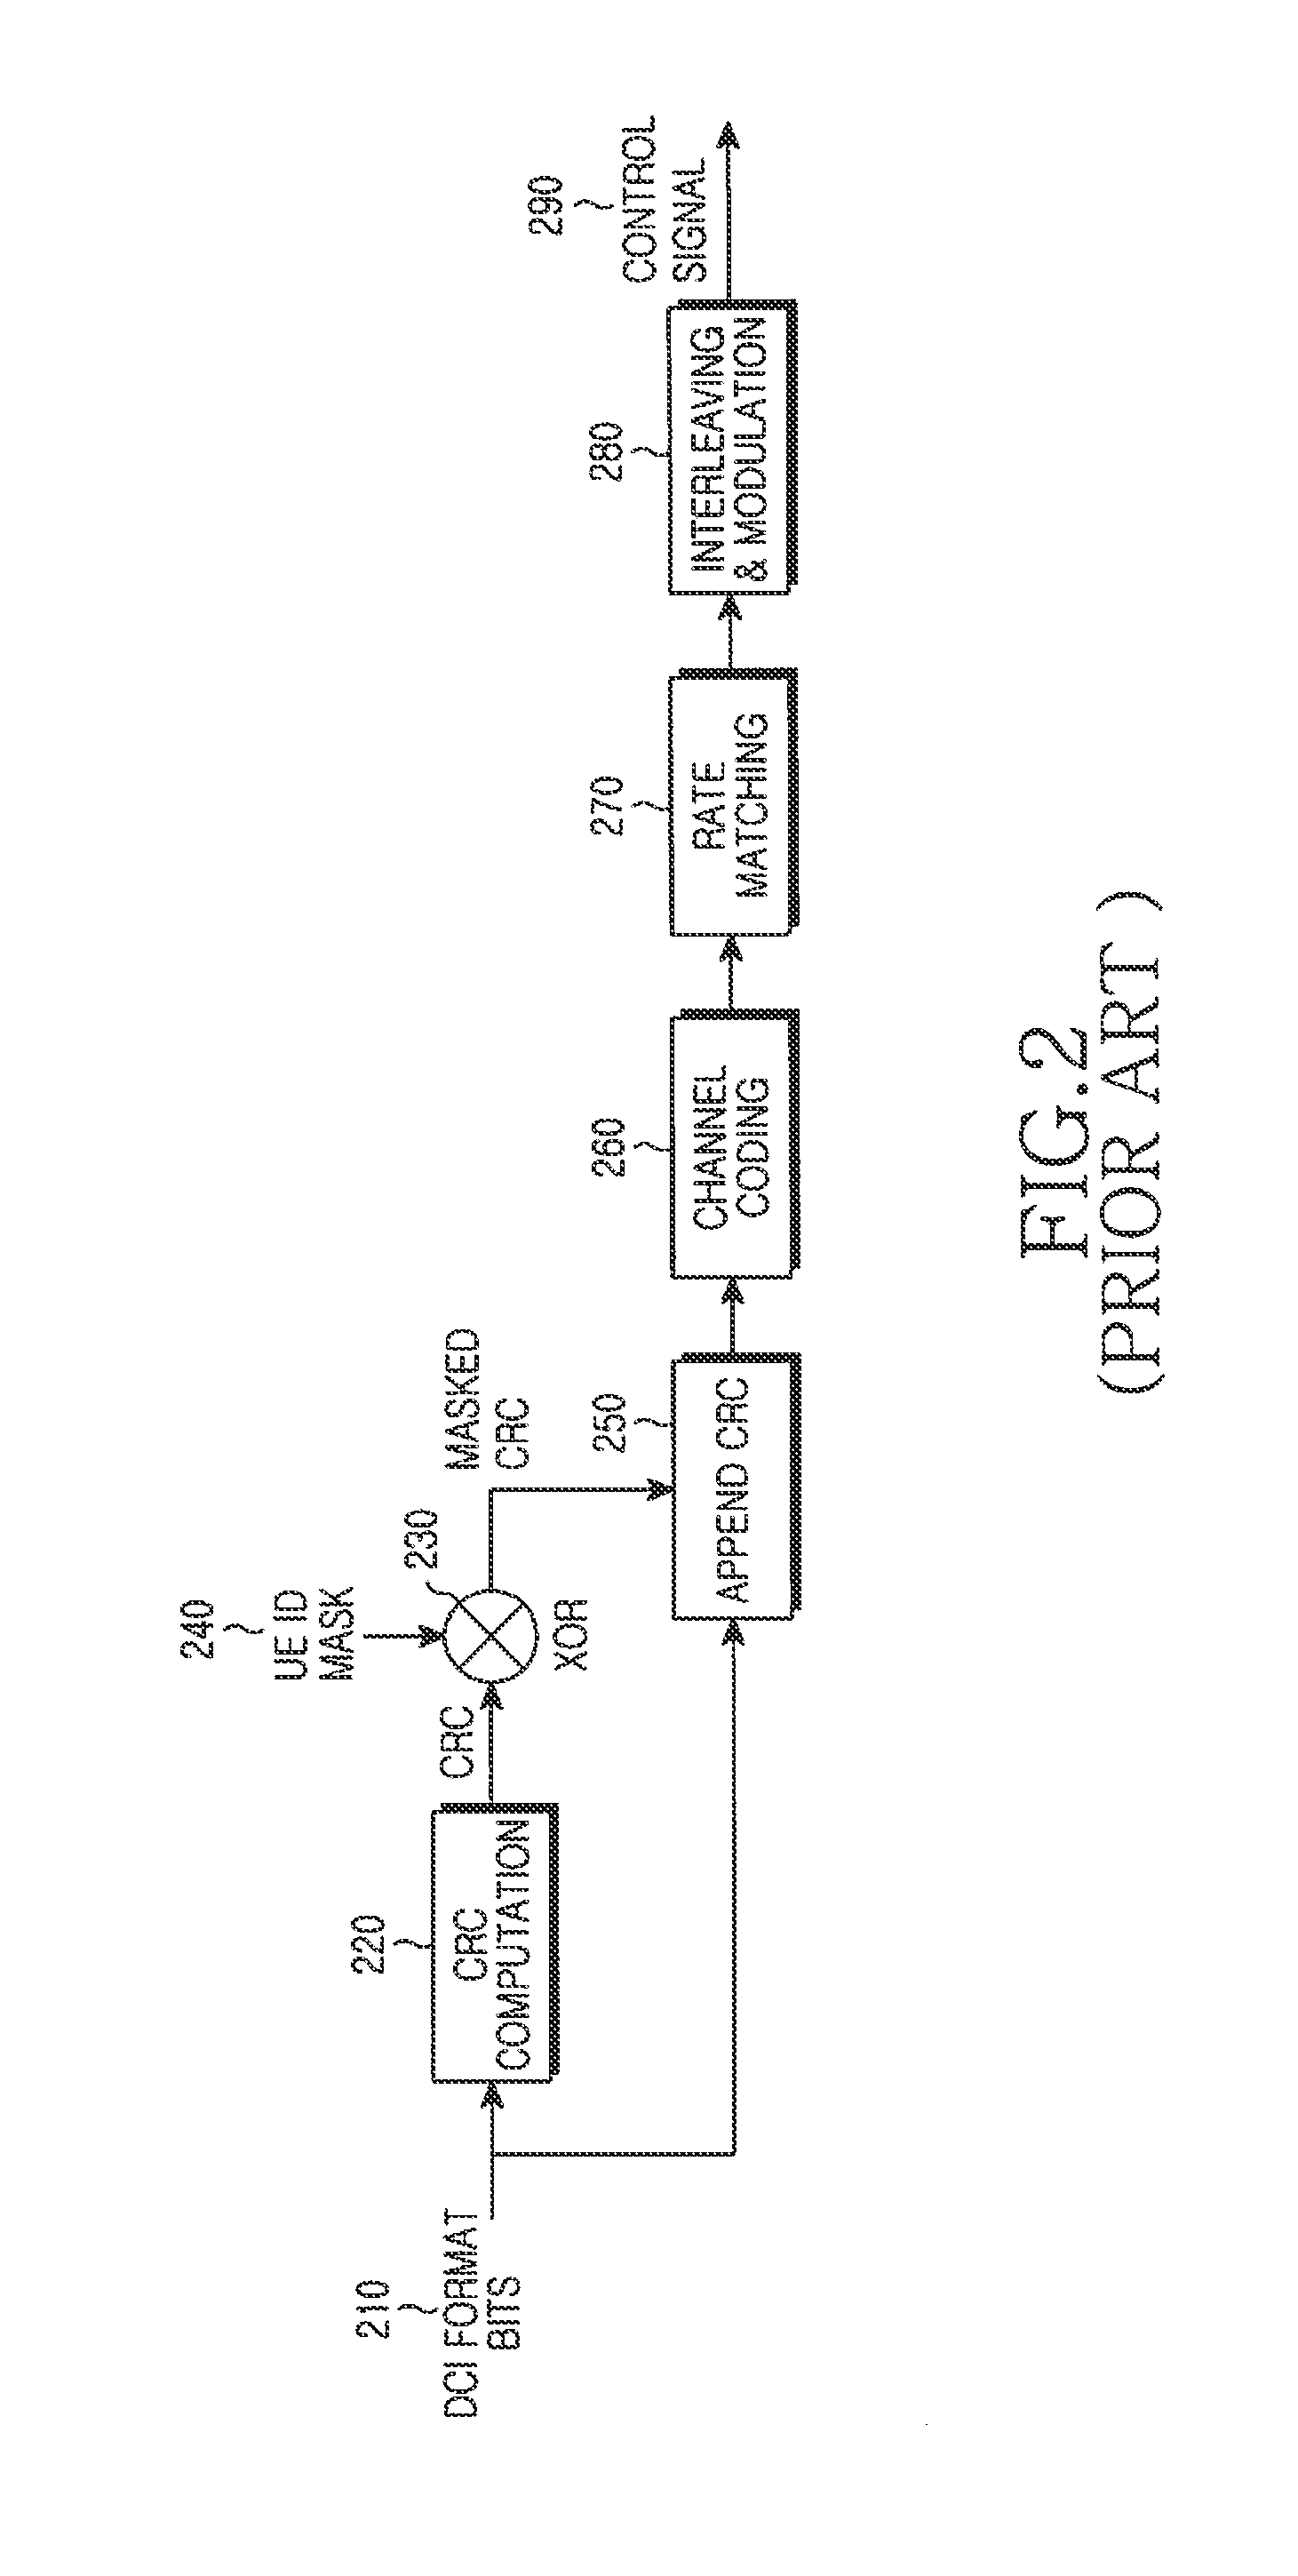 Extending physical downlink control channels